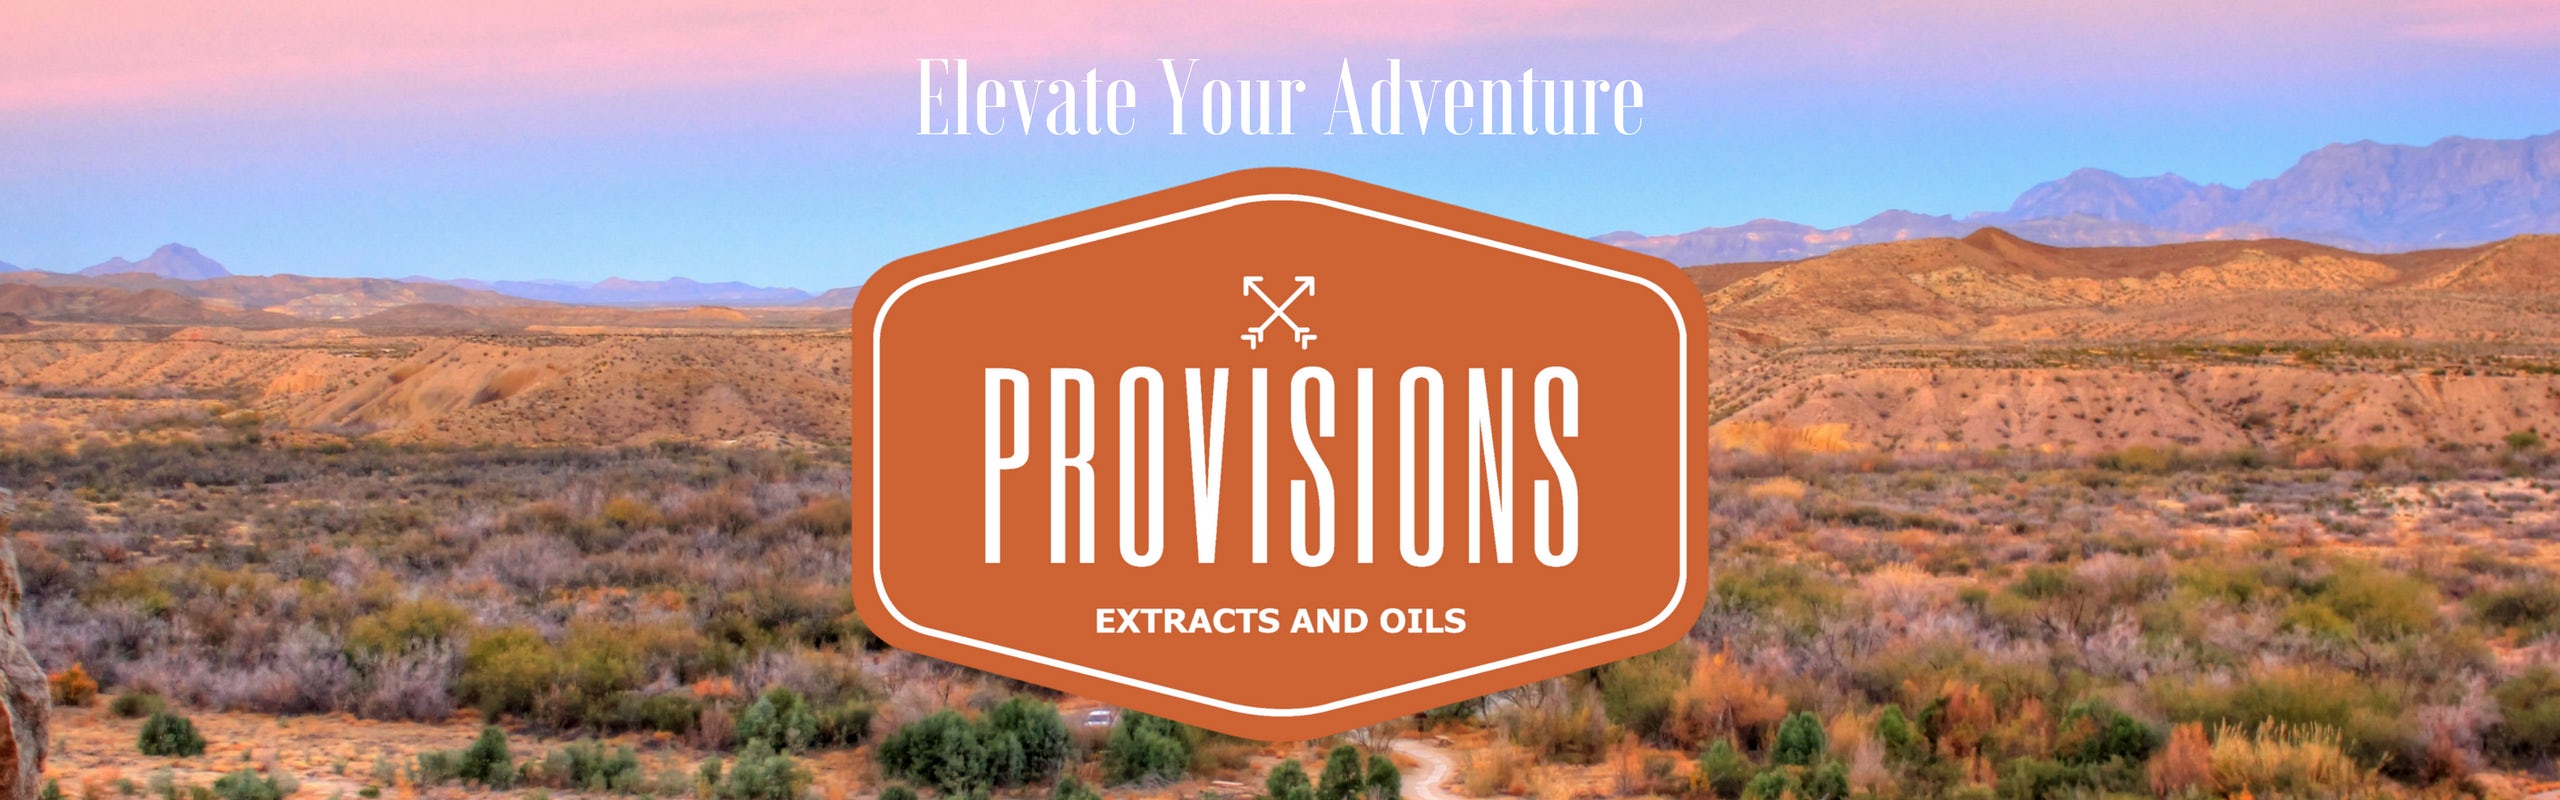 Provisions banner